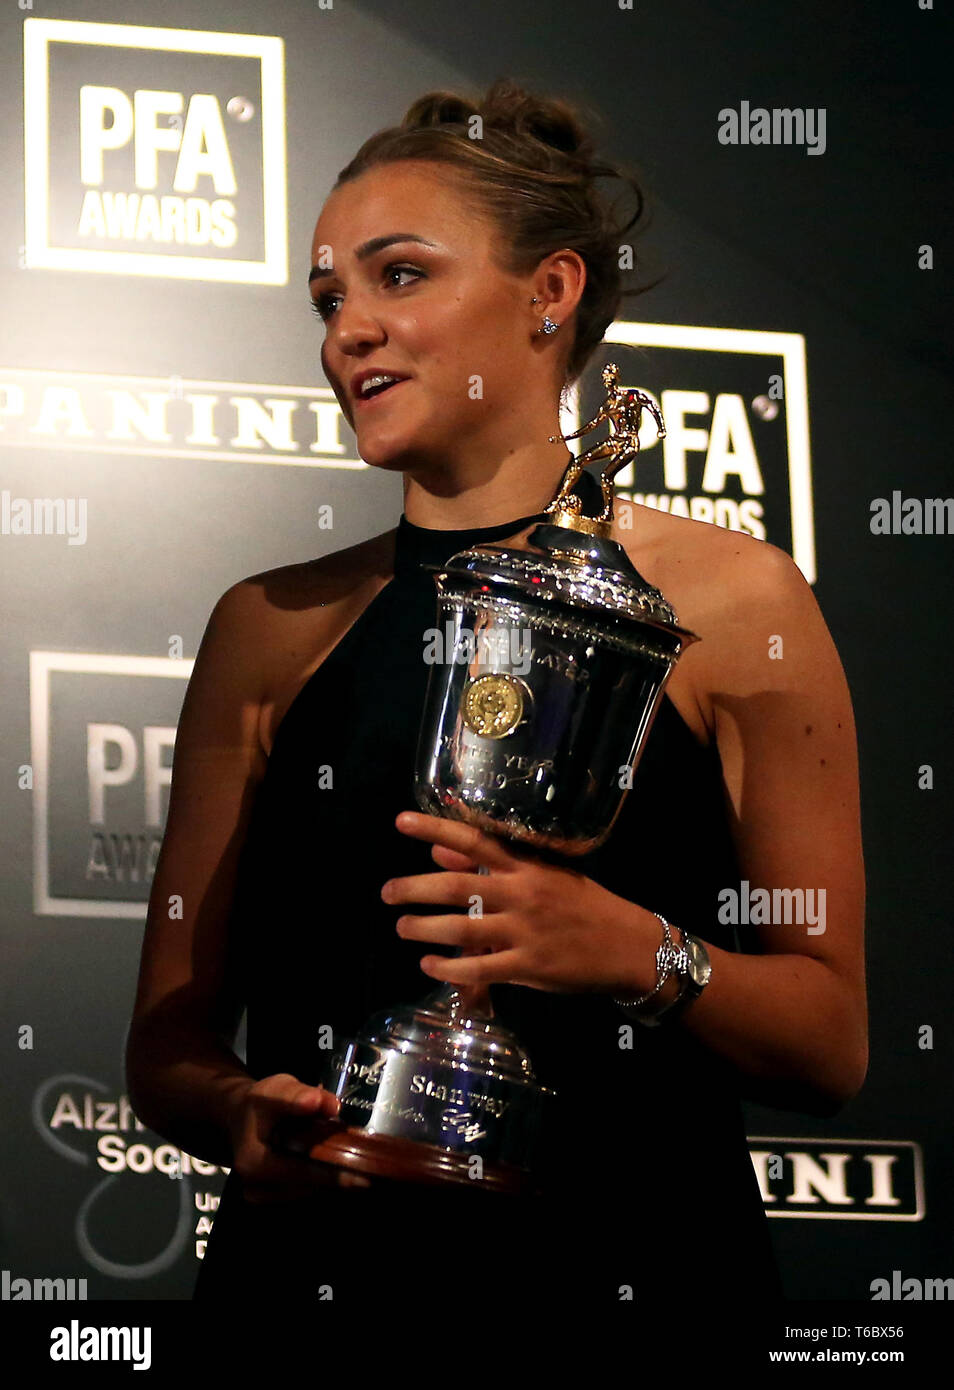 Manchester City Women's Georgia Stanway wins the PFA Young Player of the Year award during the 2019 PFA Awards at the Grosvenor House Hotel, London. PRESS ASSOCIATION Photo. Picture date: Sunday April 28, 2019. See PA story SOCCER PFA. Photo credit should read: Steven Paston/PA Wire Stock Photo